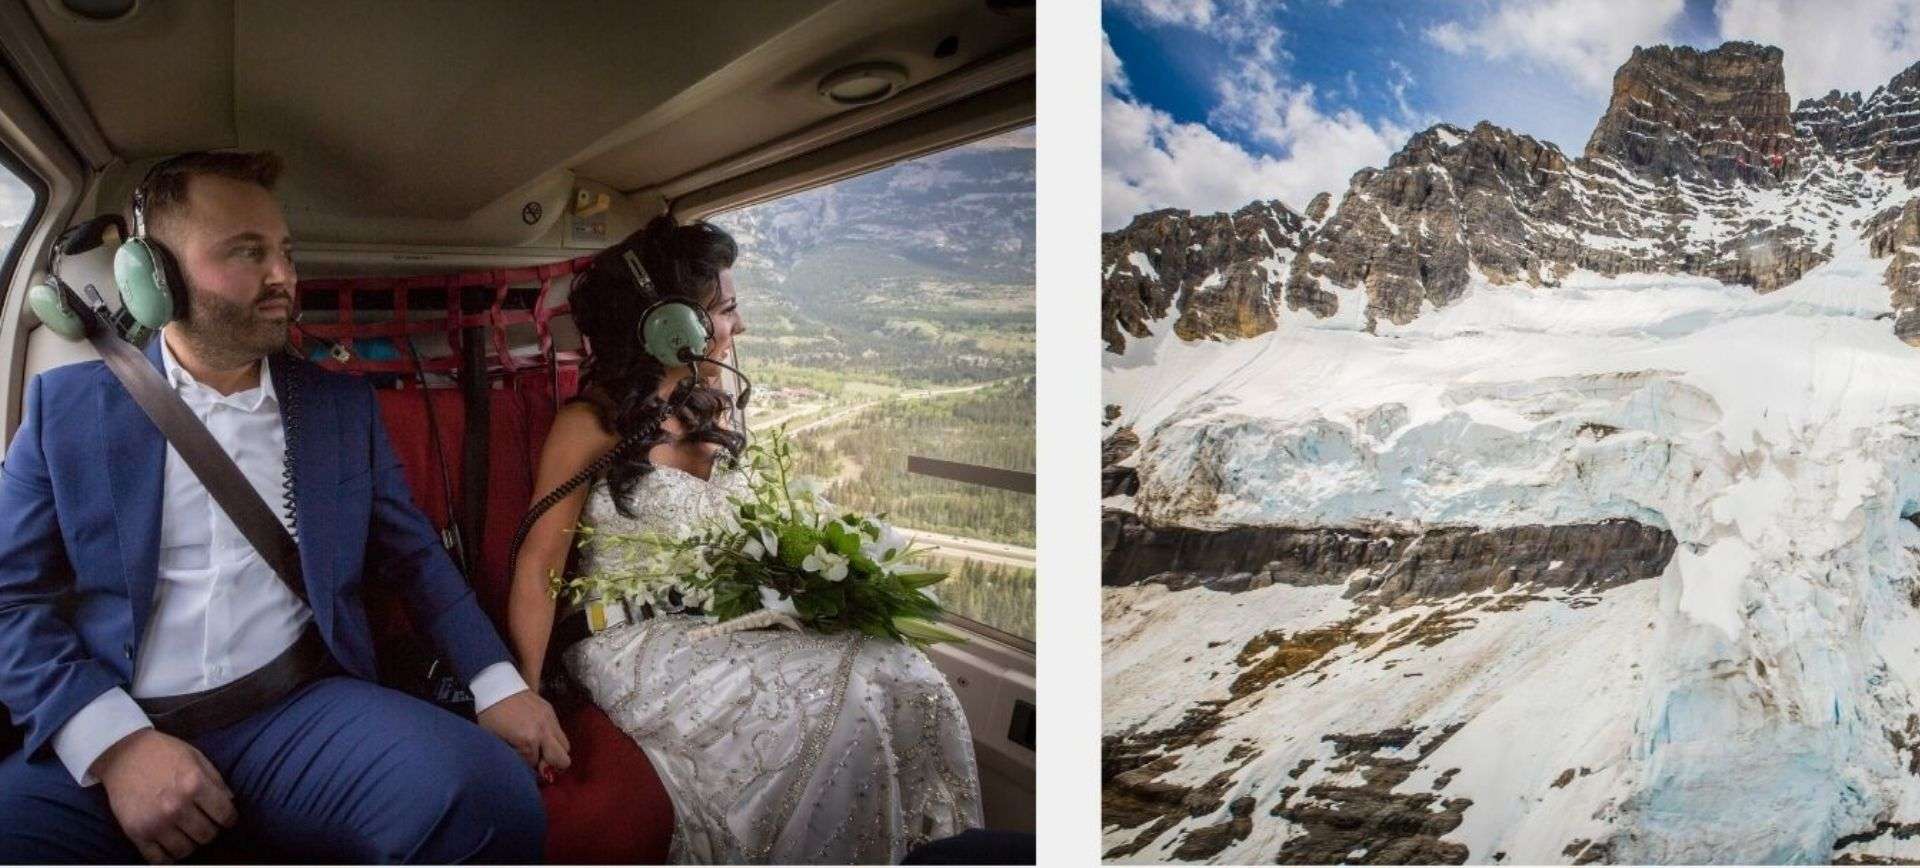 heli-wedding adventure in the canadian rocky mountains - bride and groom during their heli-ride on their wedding day, looking at glacier